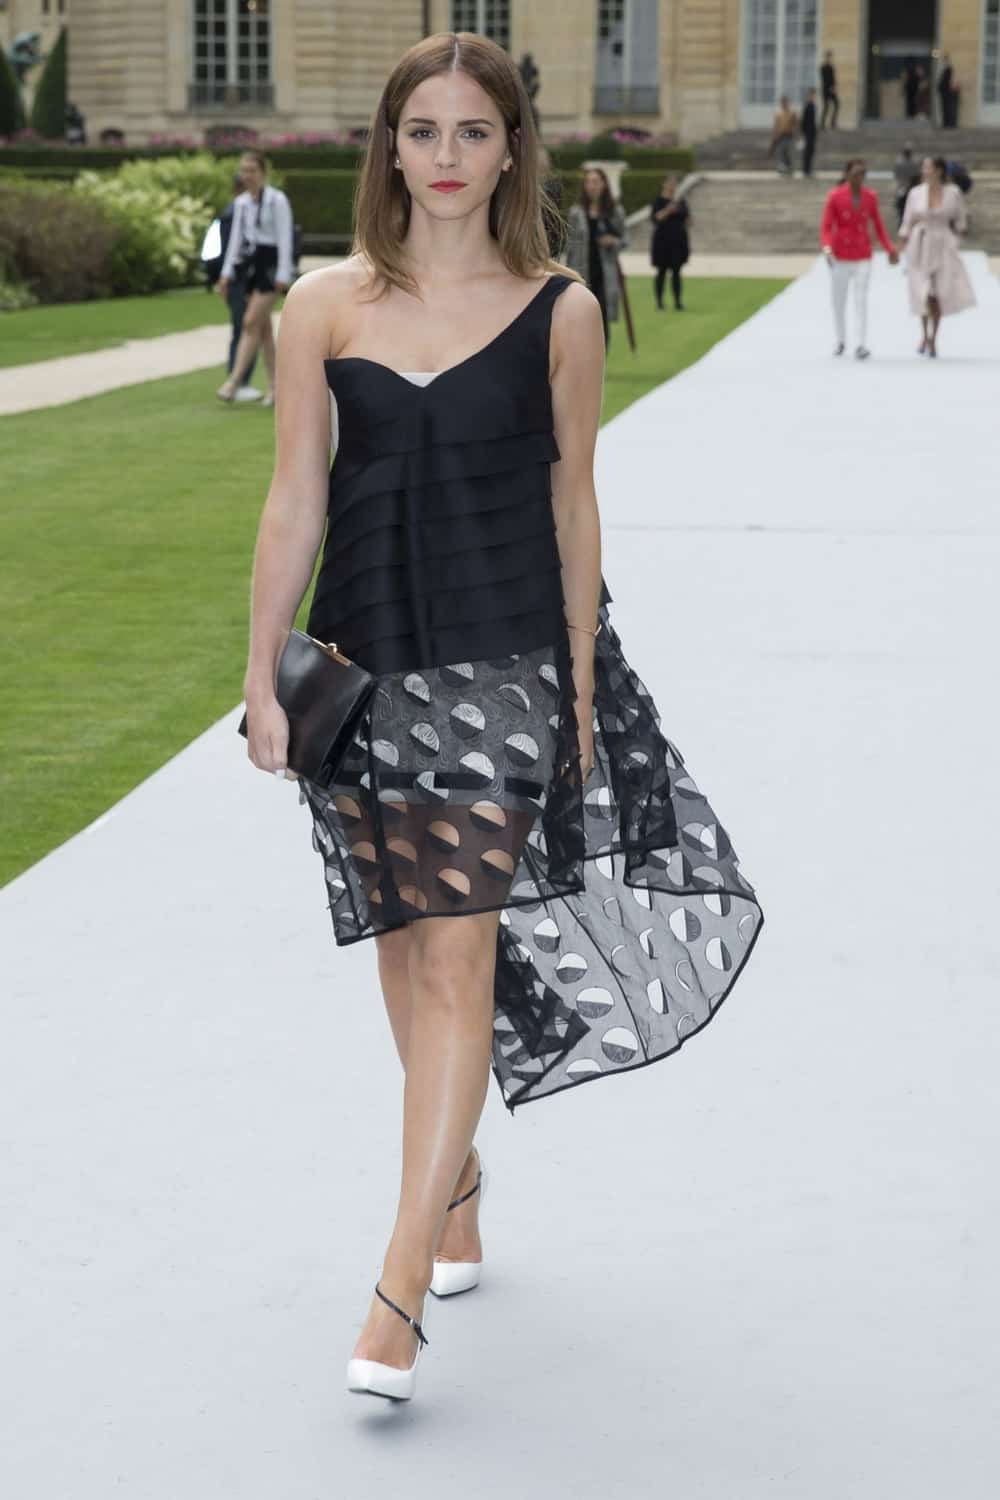 Emma Watson Was Breathtaking in a Sheer Dress at the Dior Show in Paris